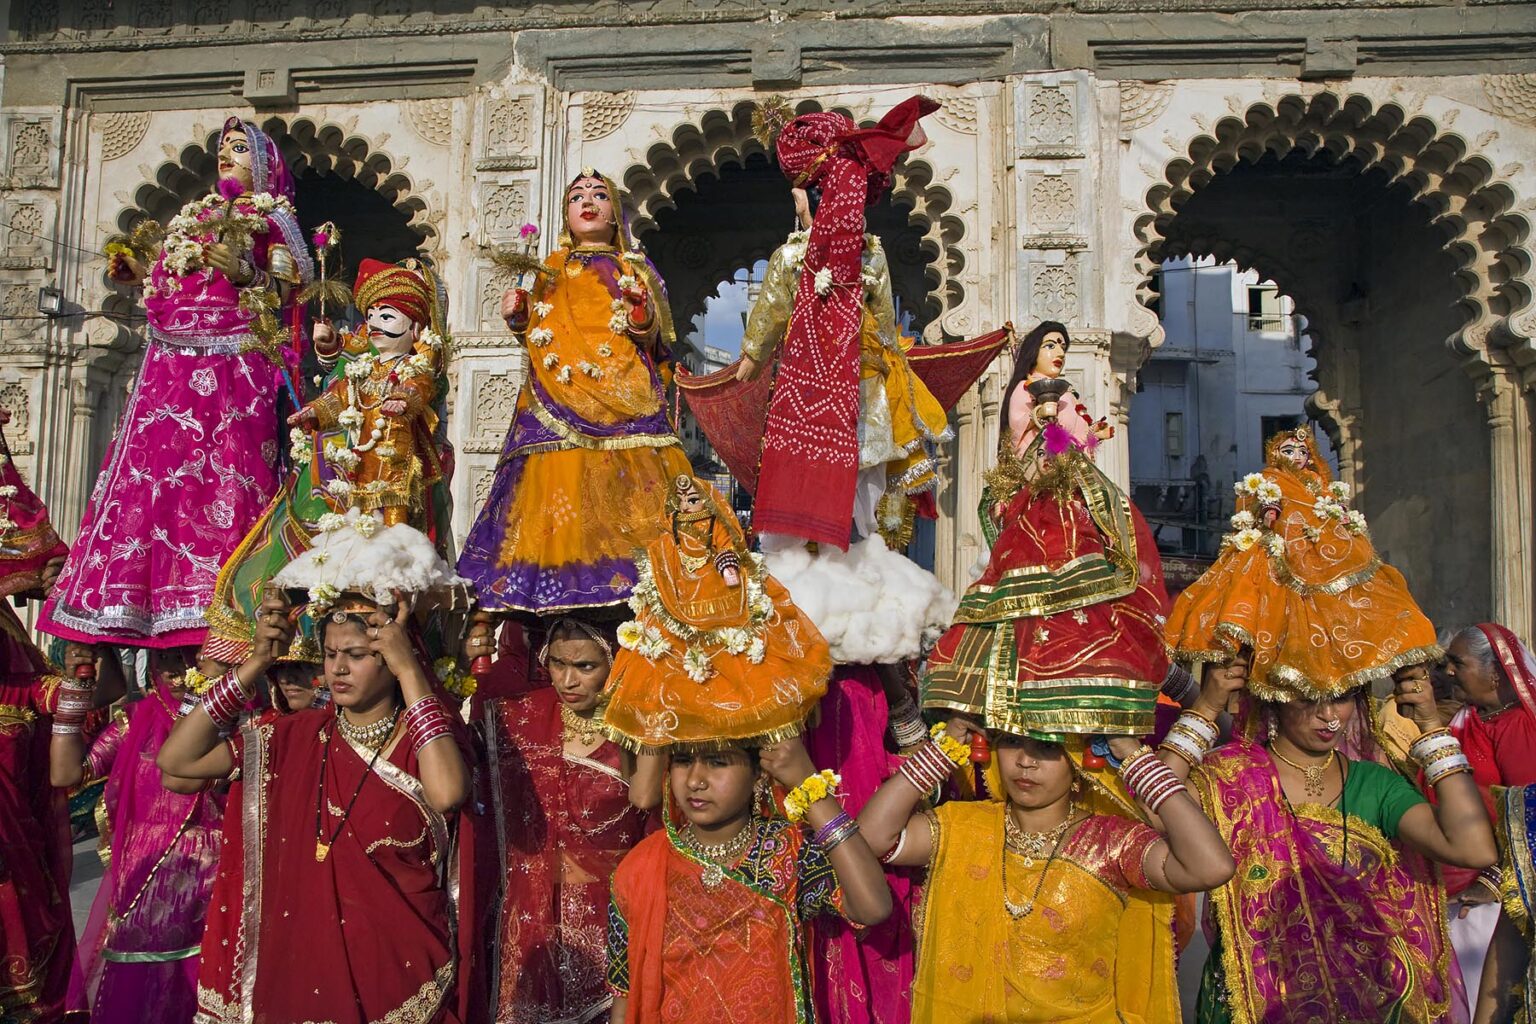 Rajasthani women carry effigies of Shiva and his wife Parvati at the GANGUR FESTIVAL also known as the MEWAR FESTIVAL in UDAIPUR - RAJASTHAN, INDIA